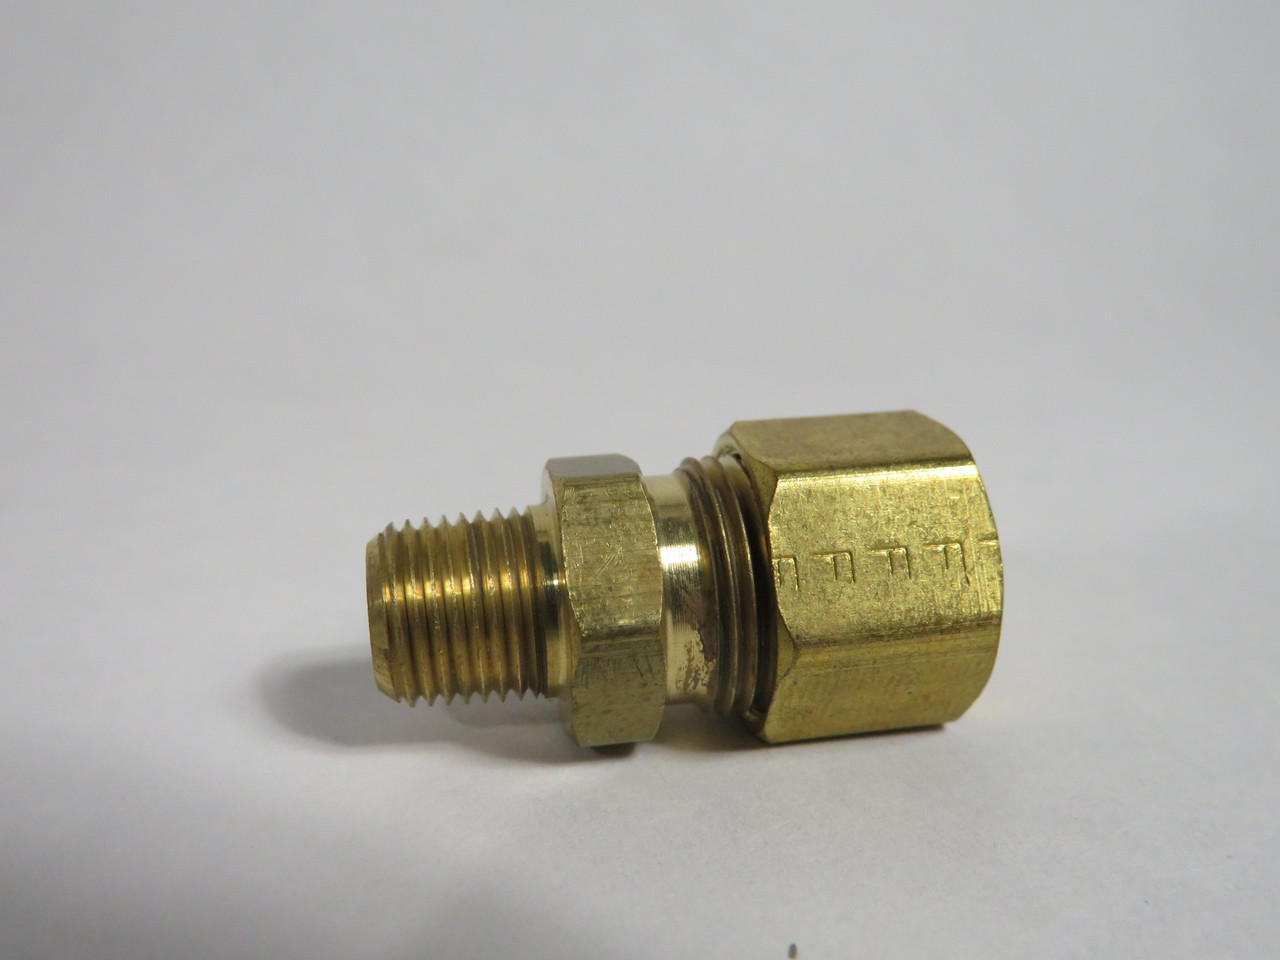 Fairview 68-6A Brass Compression Fitting 1/8" Male NPT 3/8" Tube Lot of 5 USED